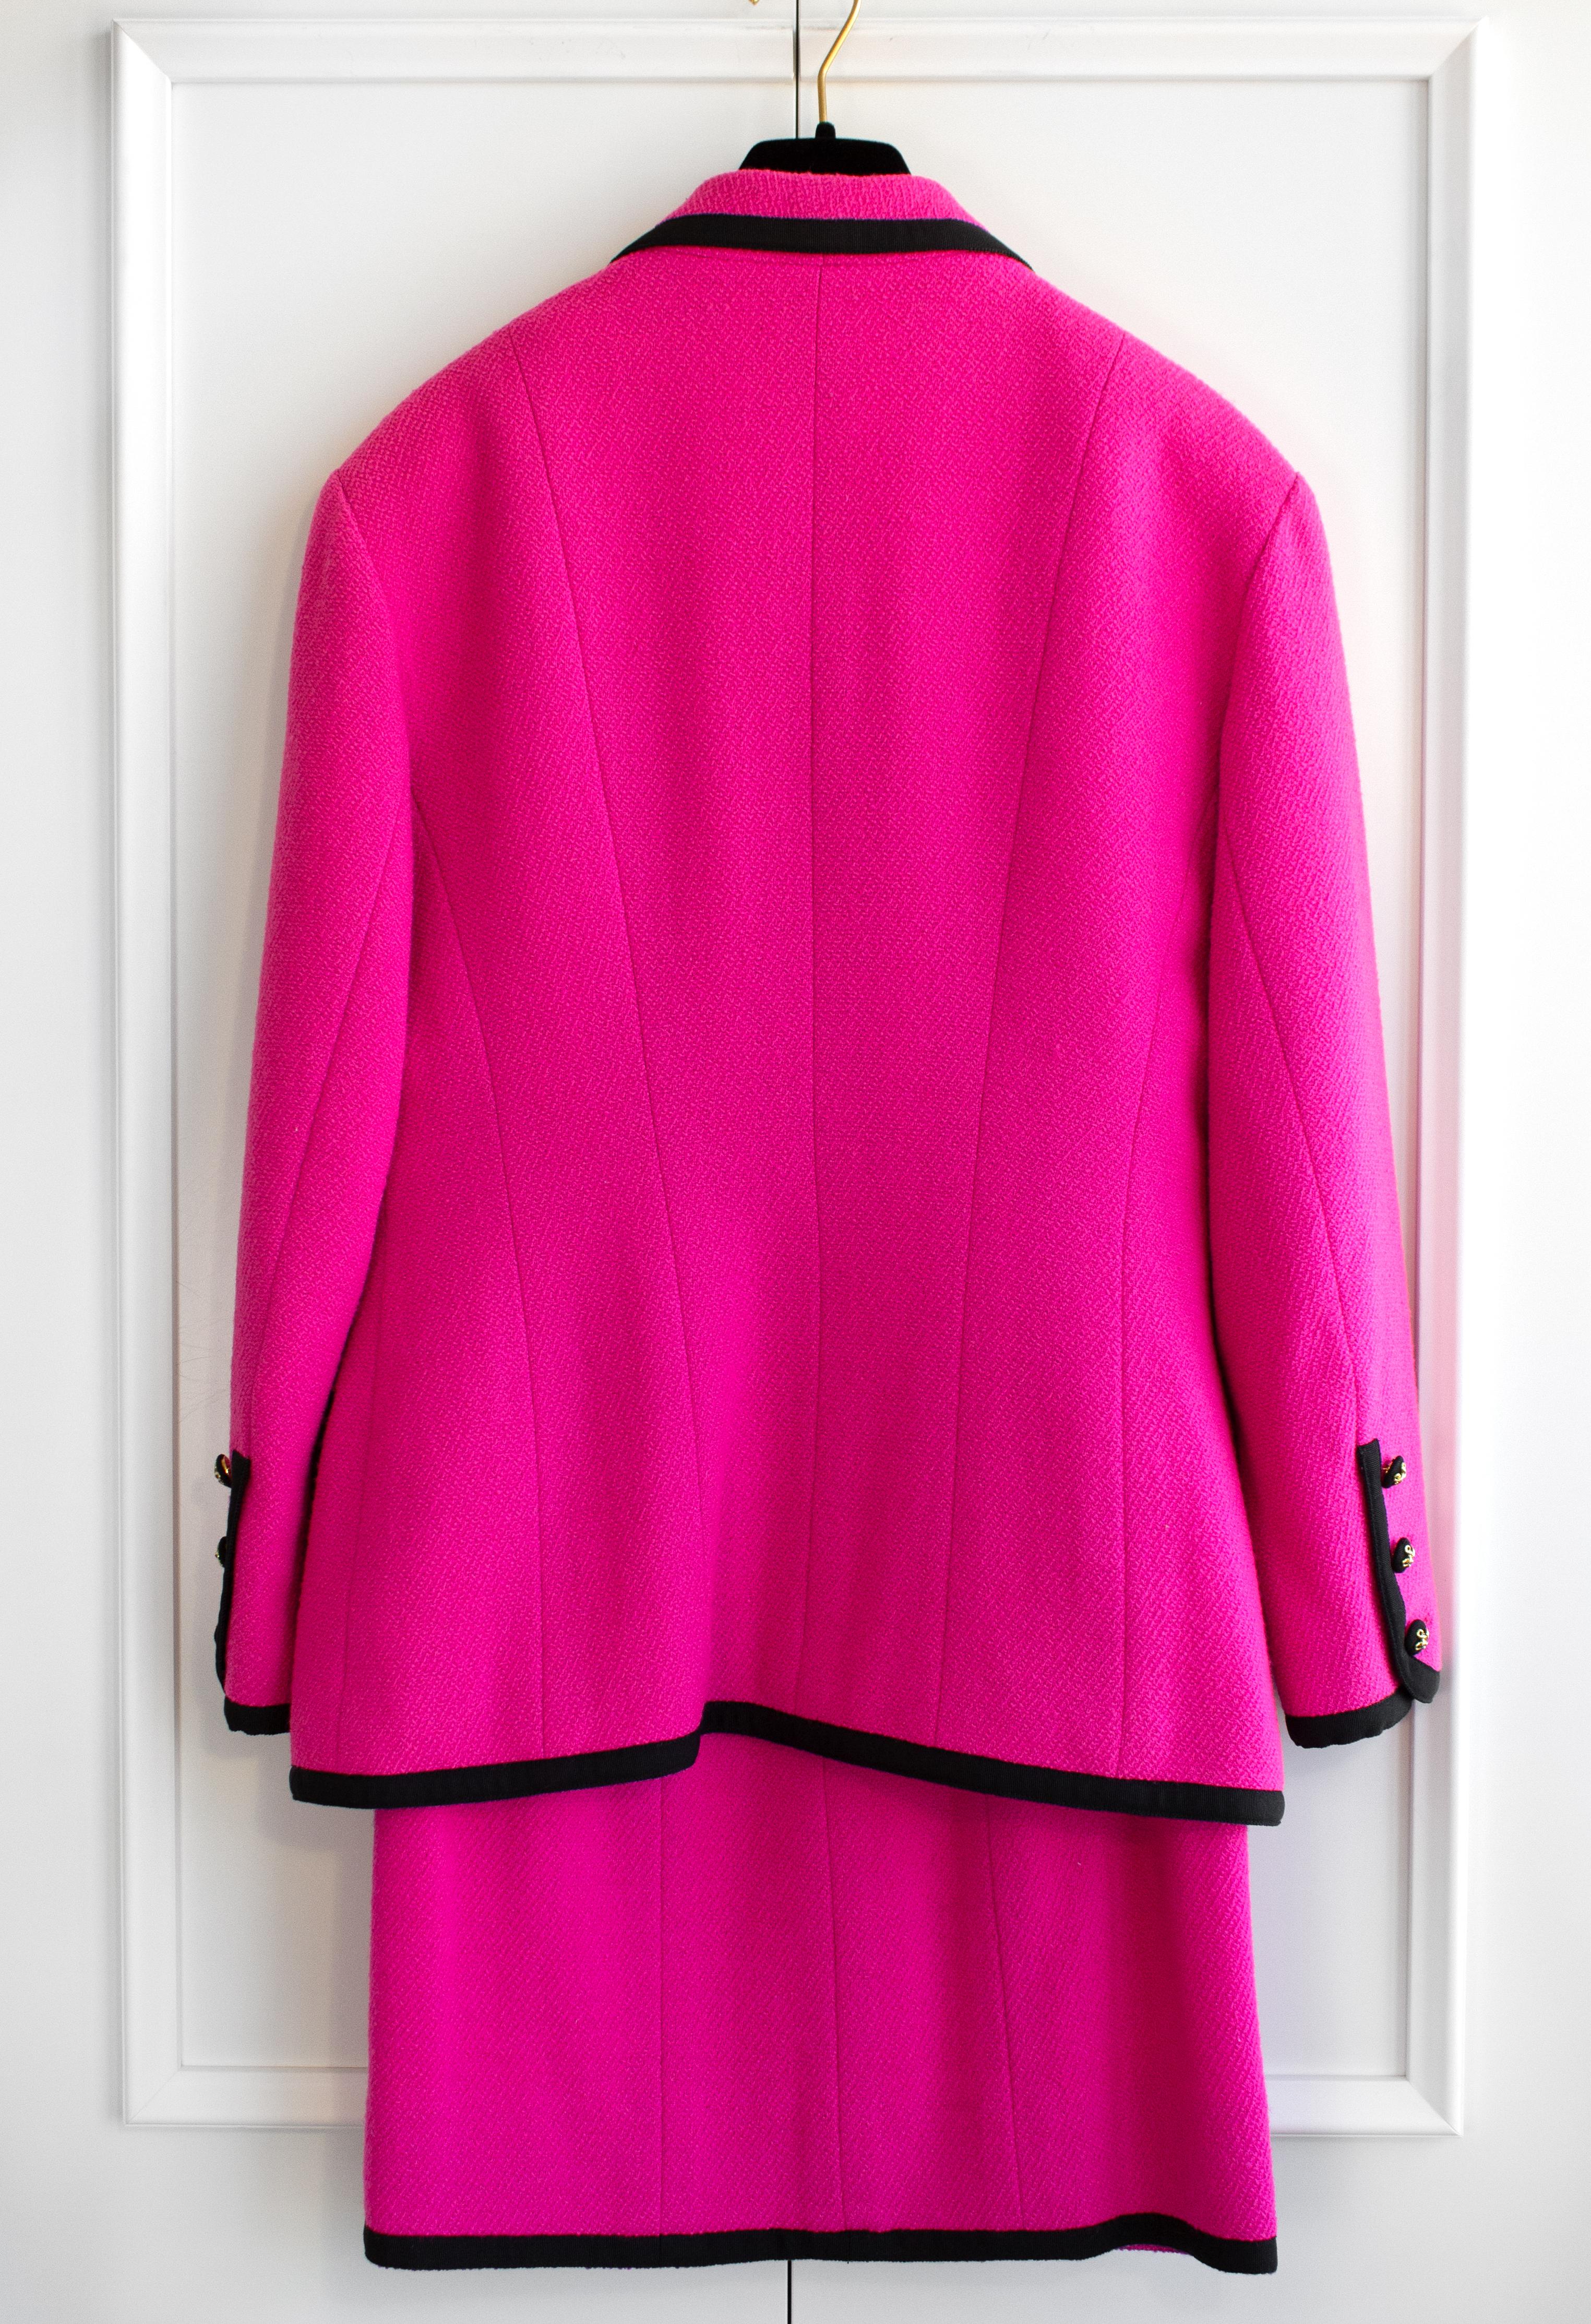 Women's Chanel Vintage S/S 1991 Collector Fuchsia Pink Black Wool Jacket Skirt Suit For Sale